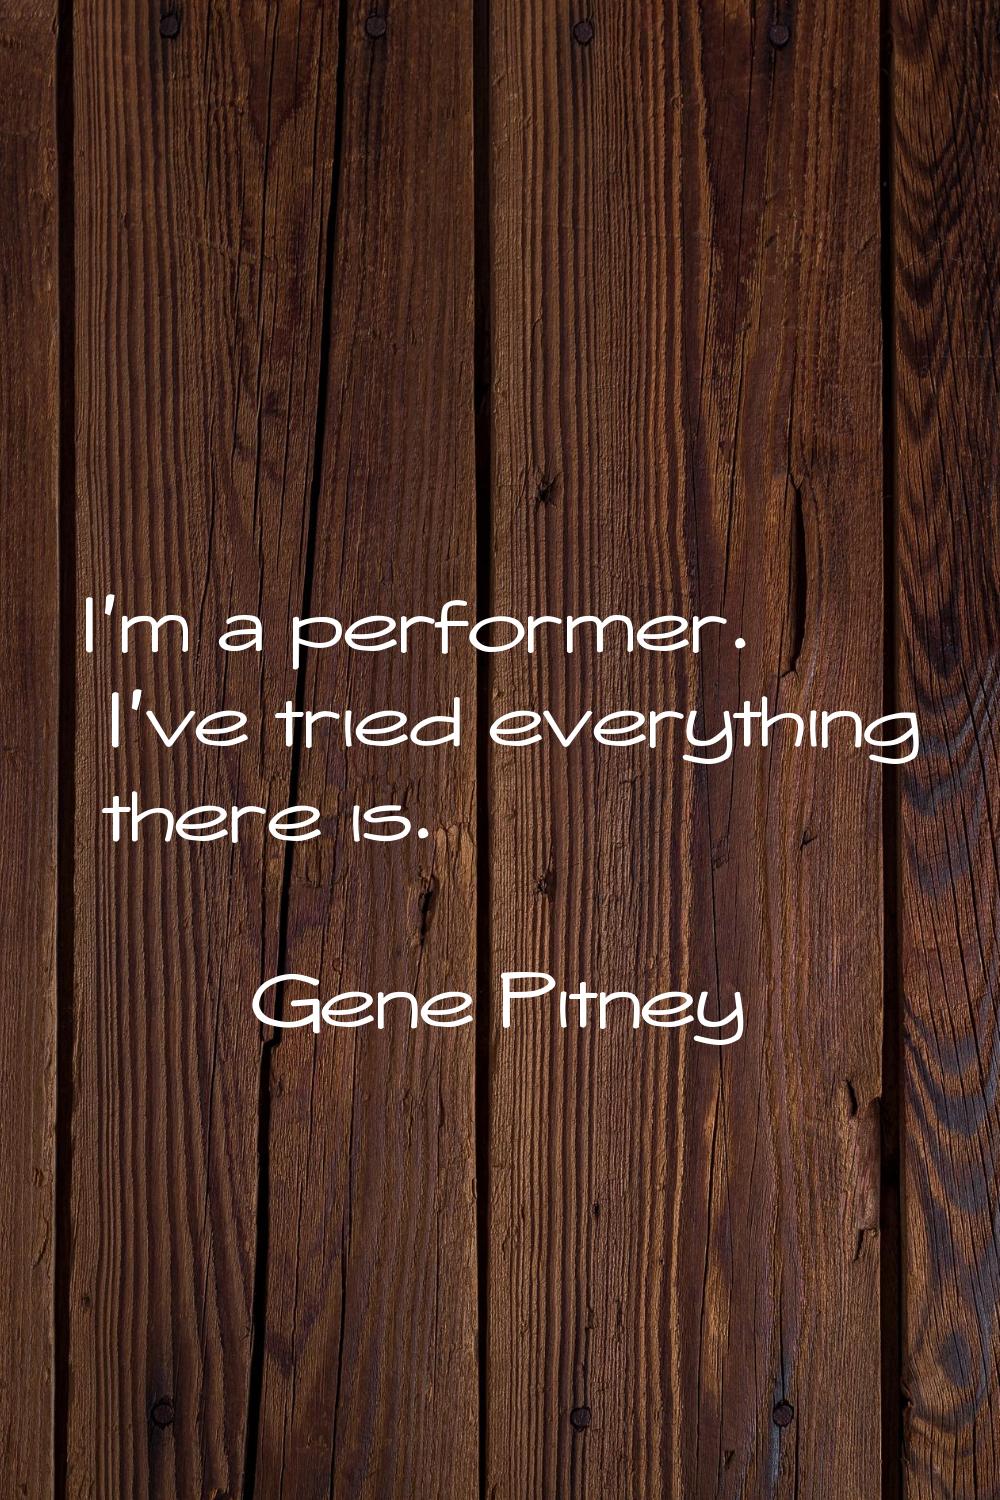 I'm a performer. I've tried everything there is.